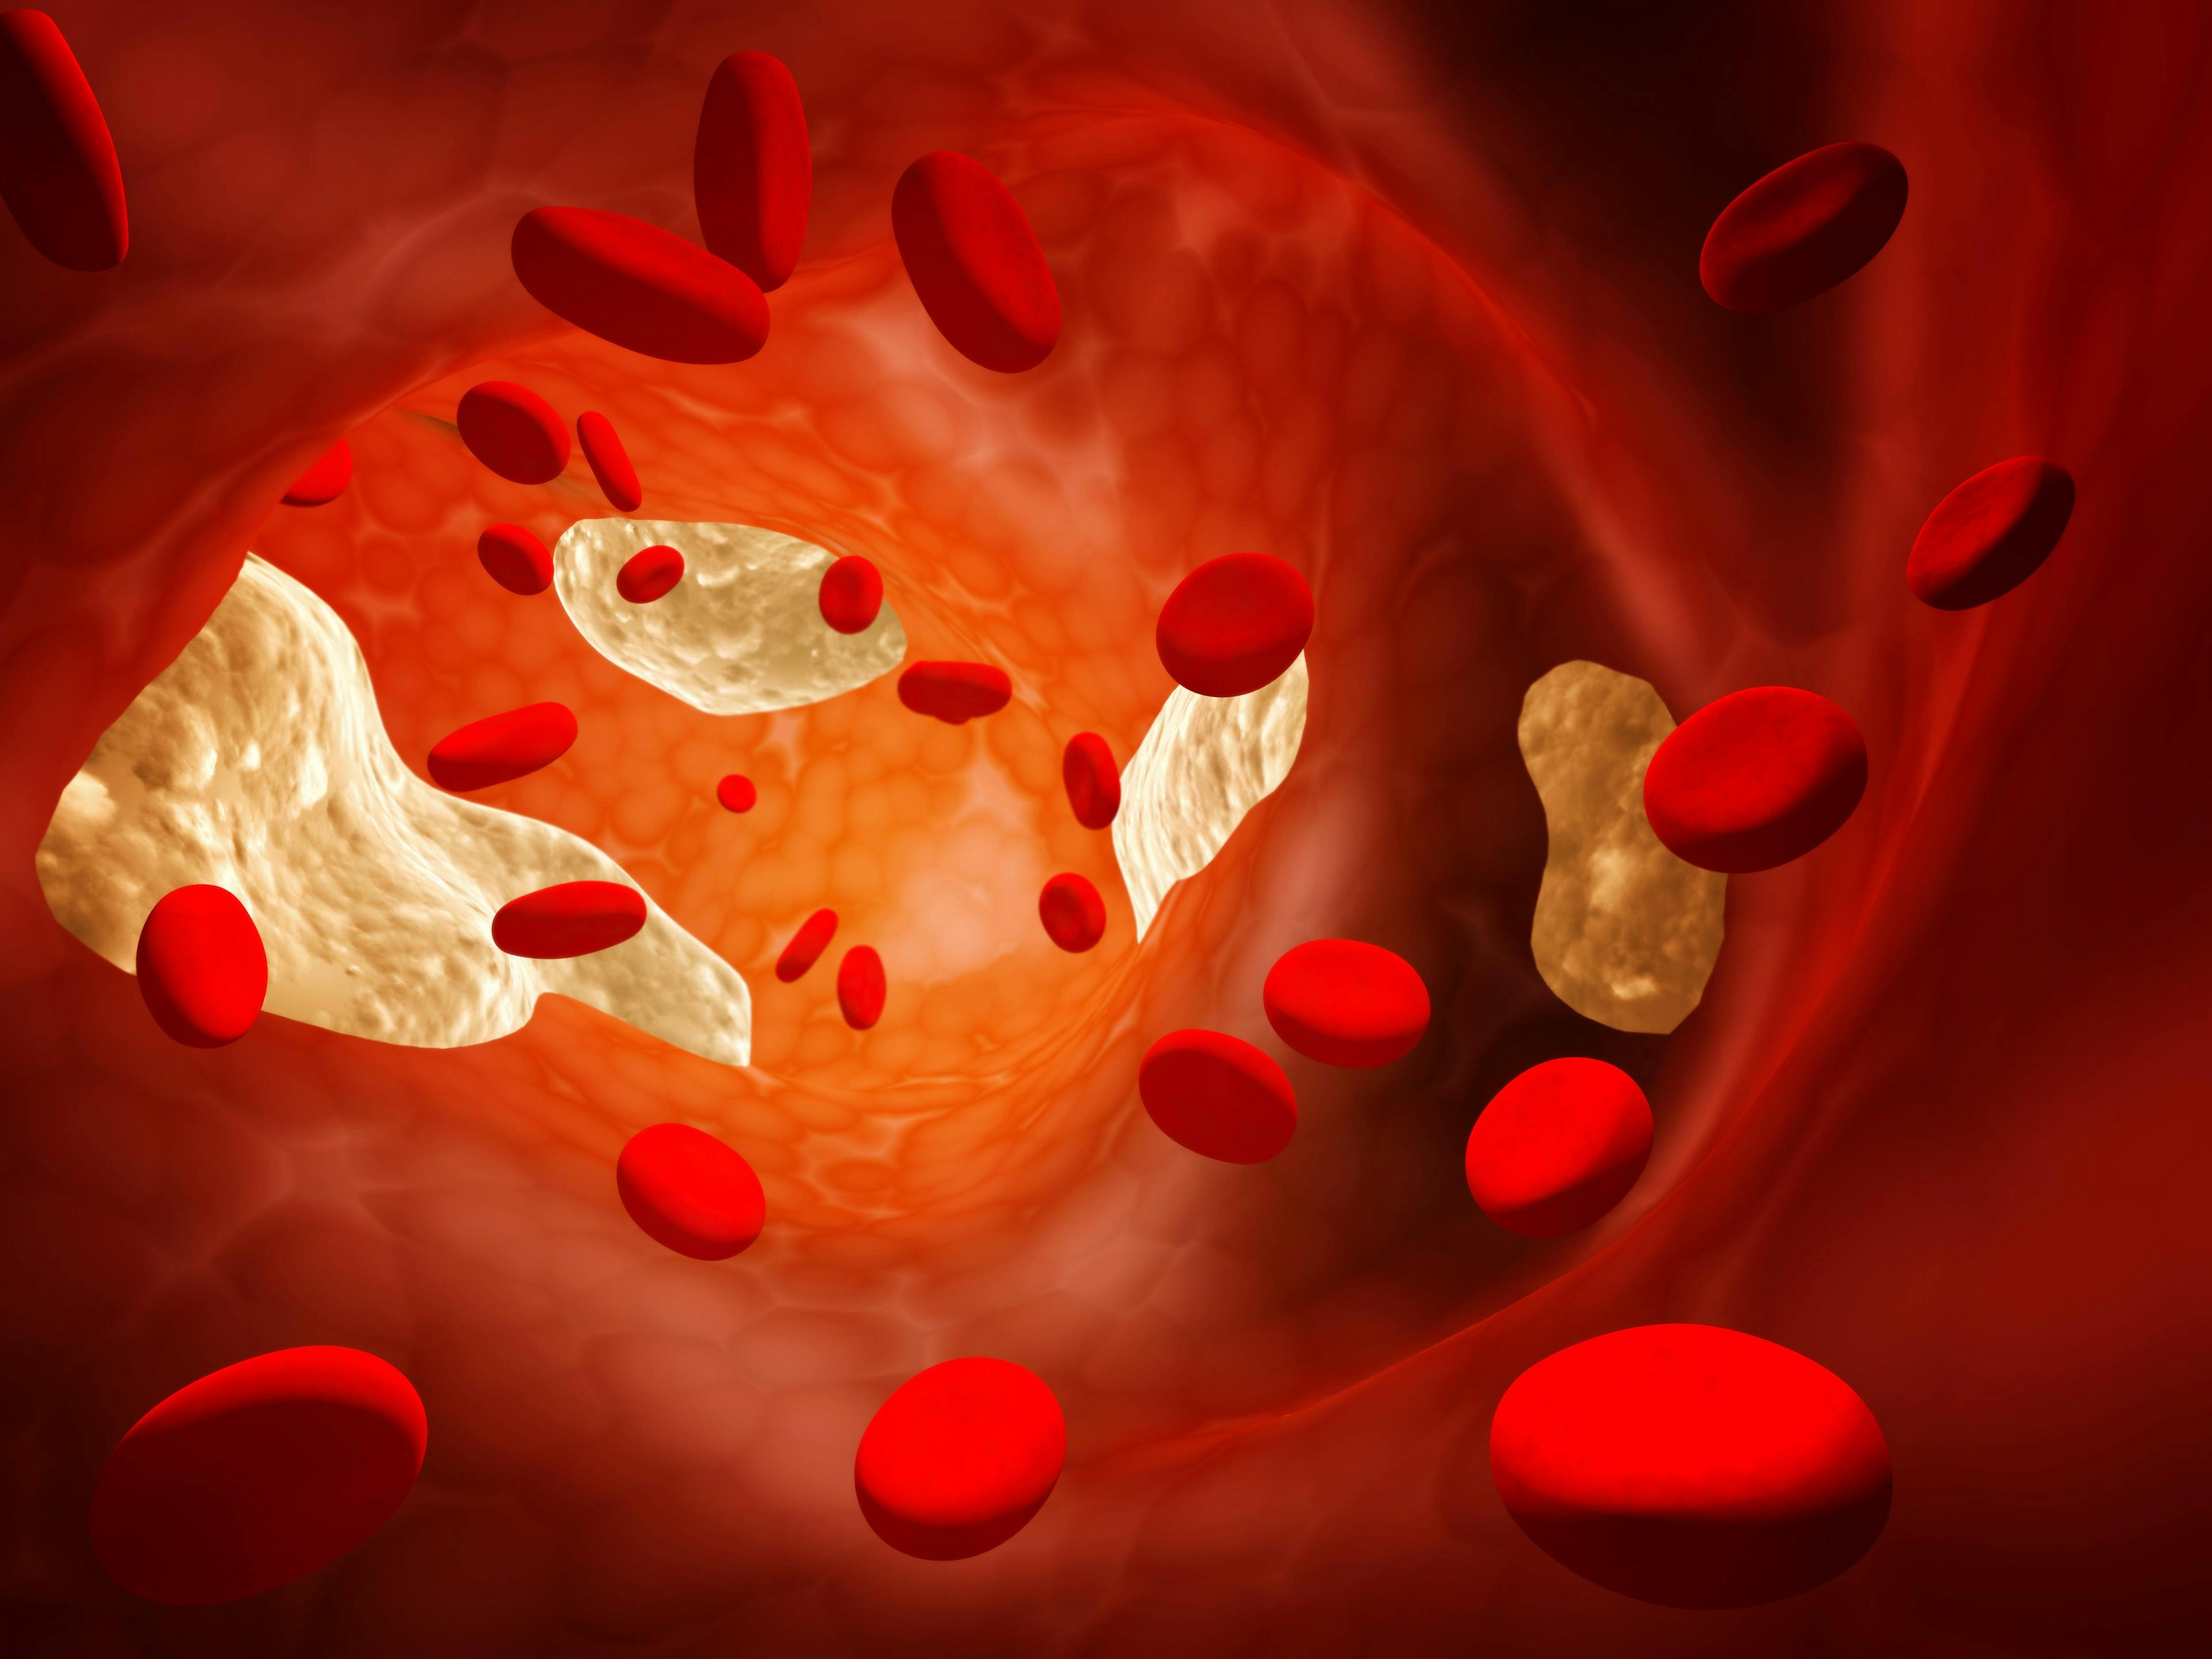 An illustration of cholesterol in the blood stream. 